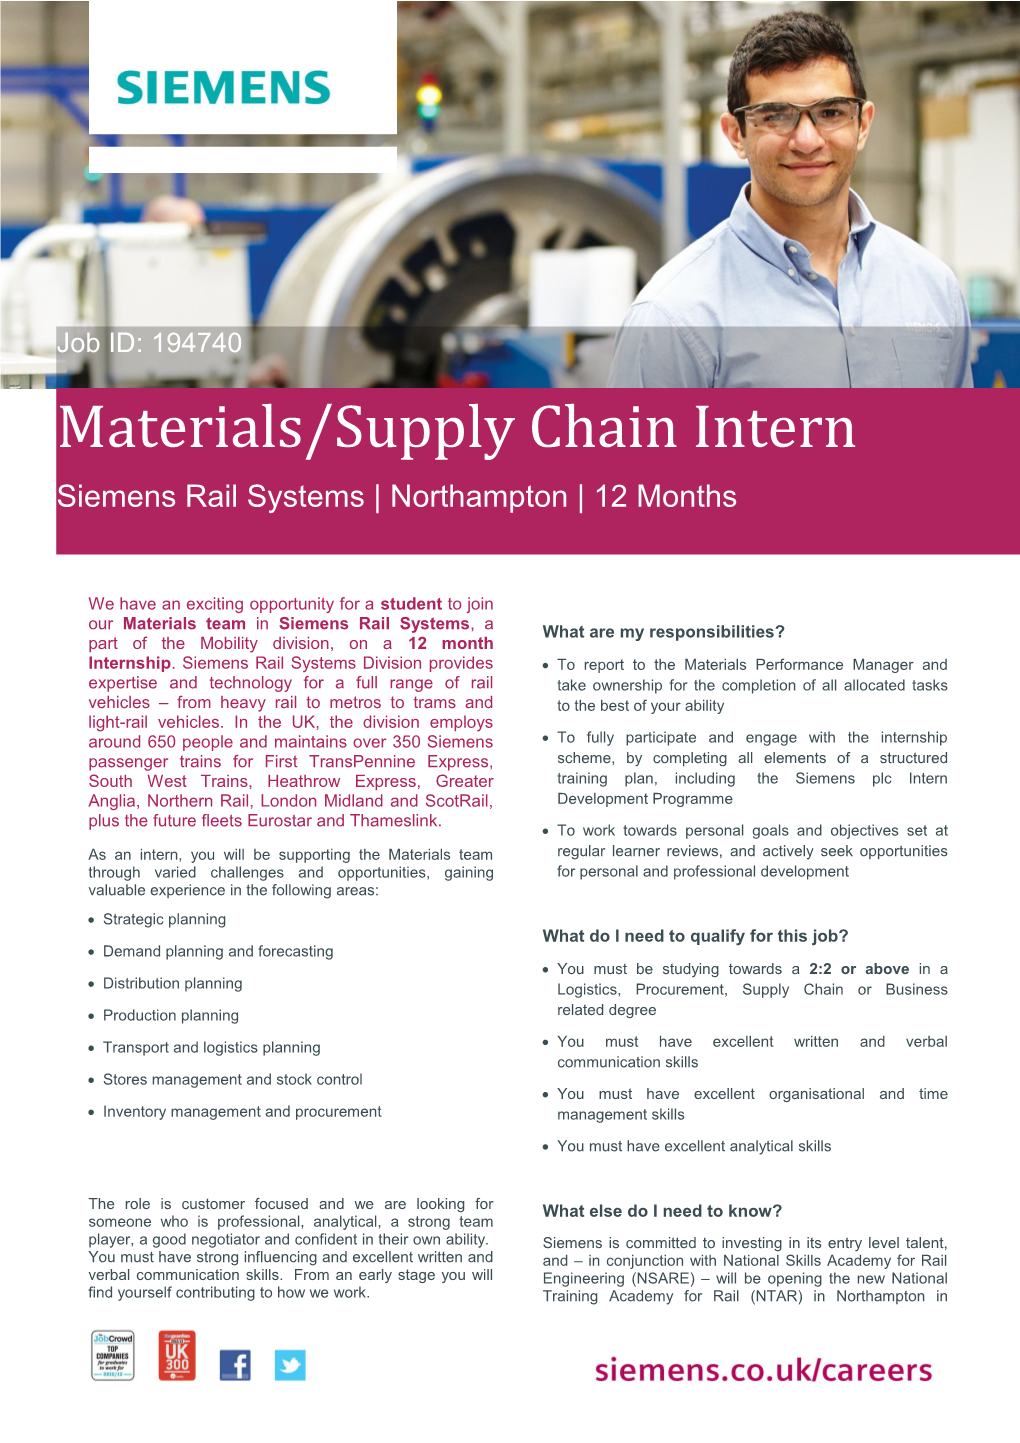 We Have an Exciting Opportunity for a Student to Join Our Materials Team in Siemensrail